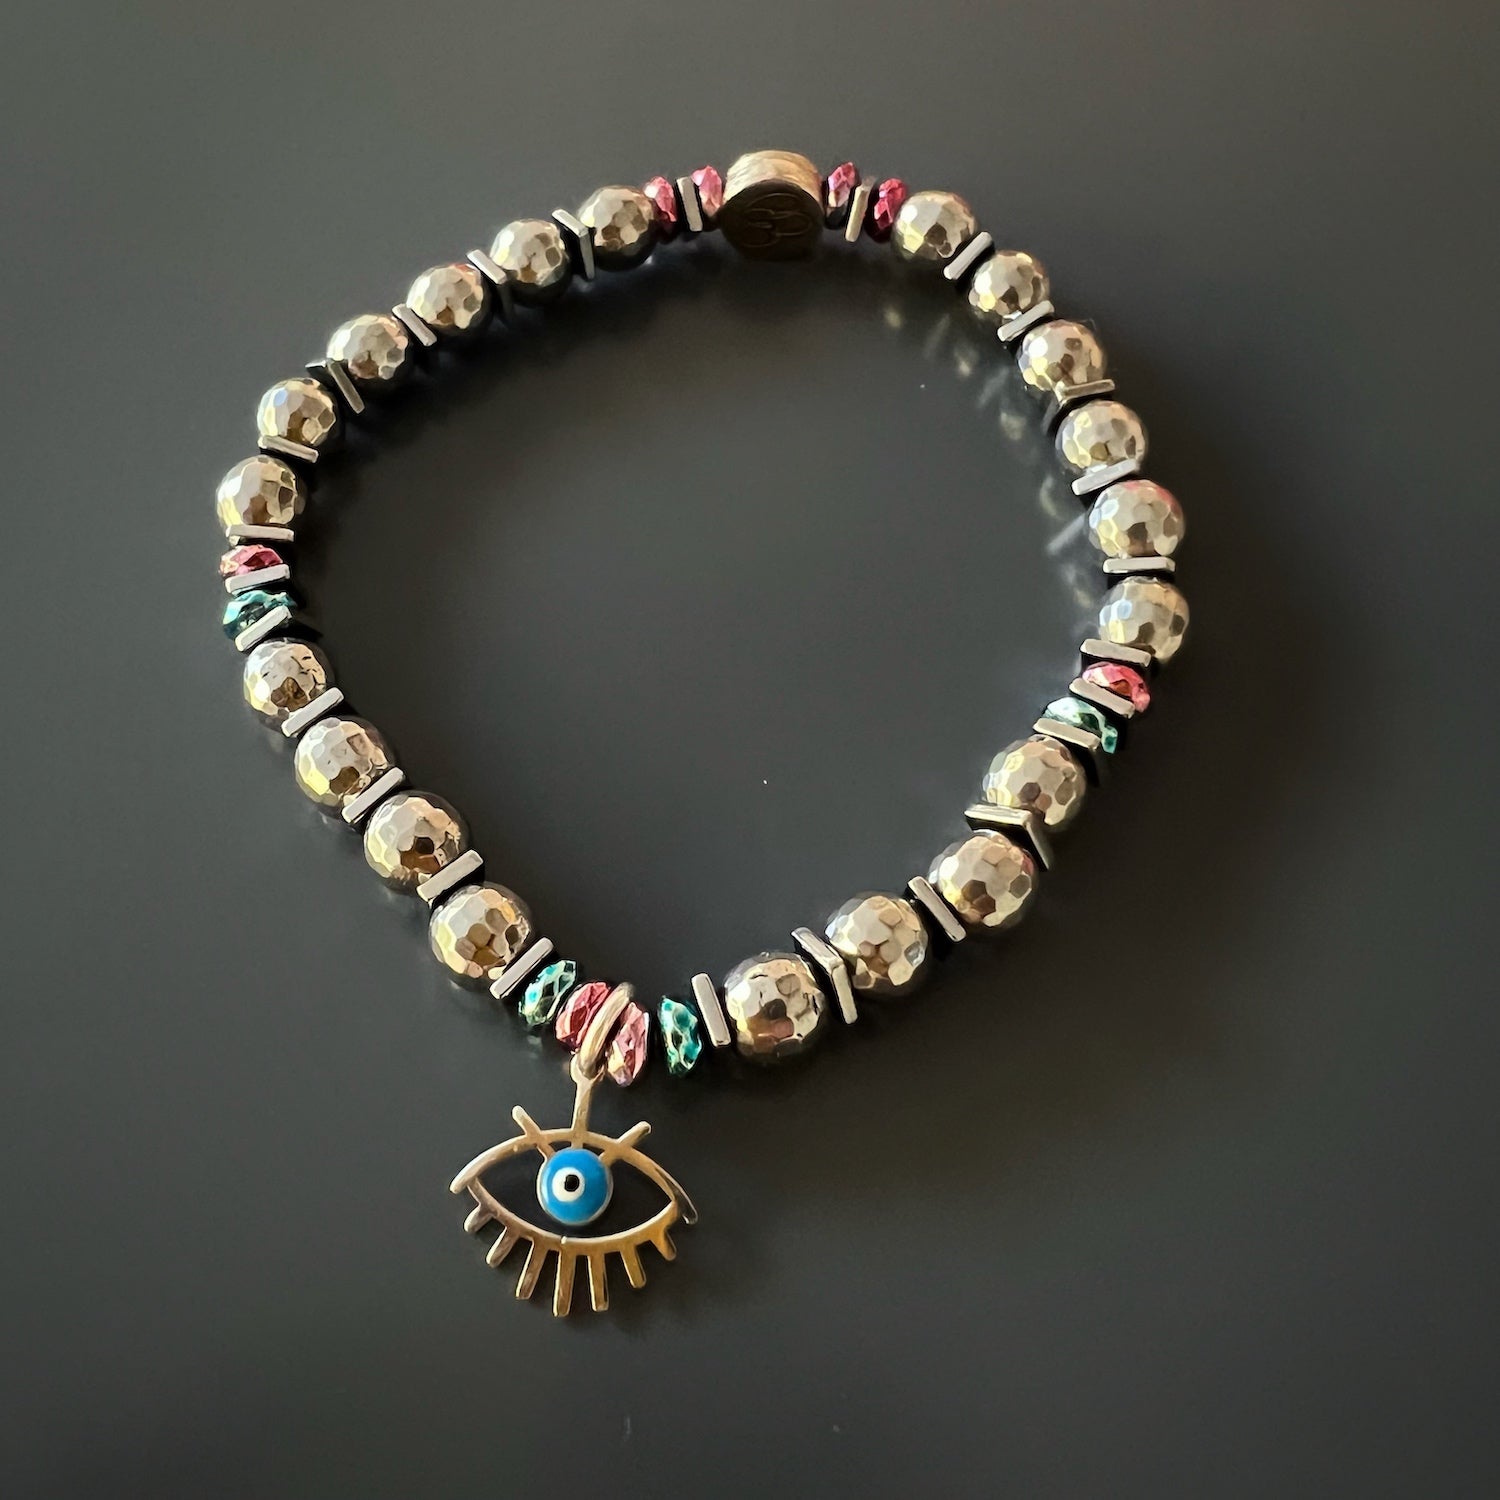 Discover the stylish and protective Eye Protection Hematite Bracelet Set, adorned with pink and blue color hematite stone spacers.